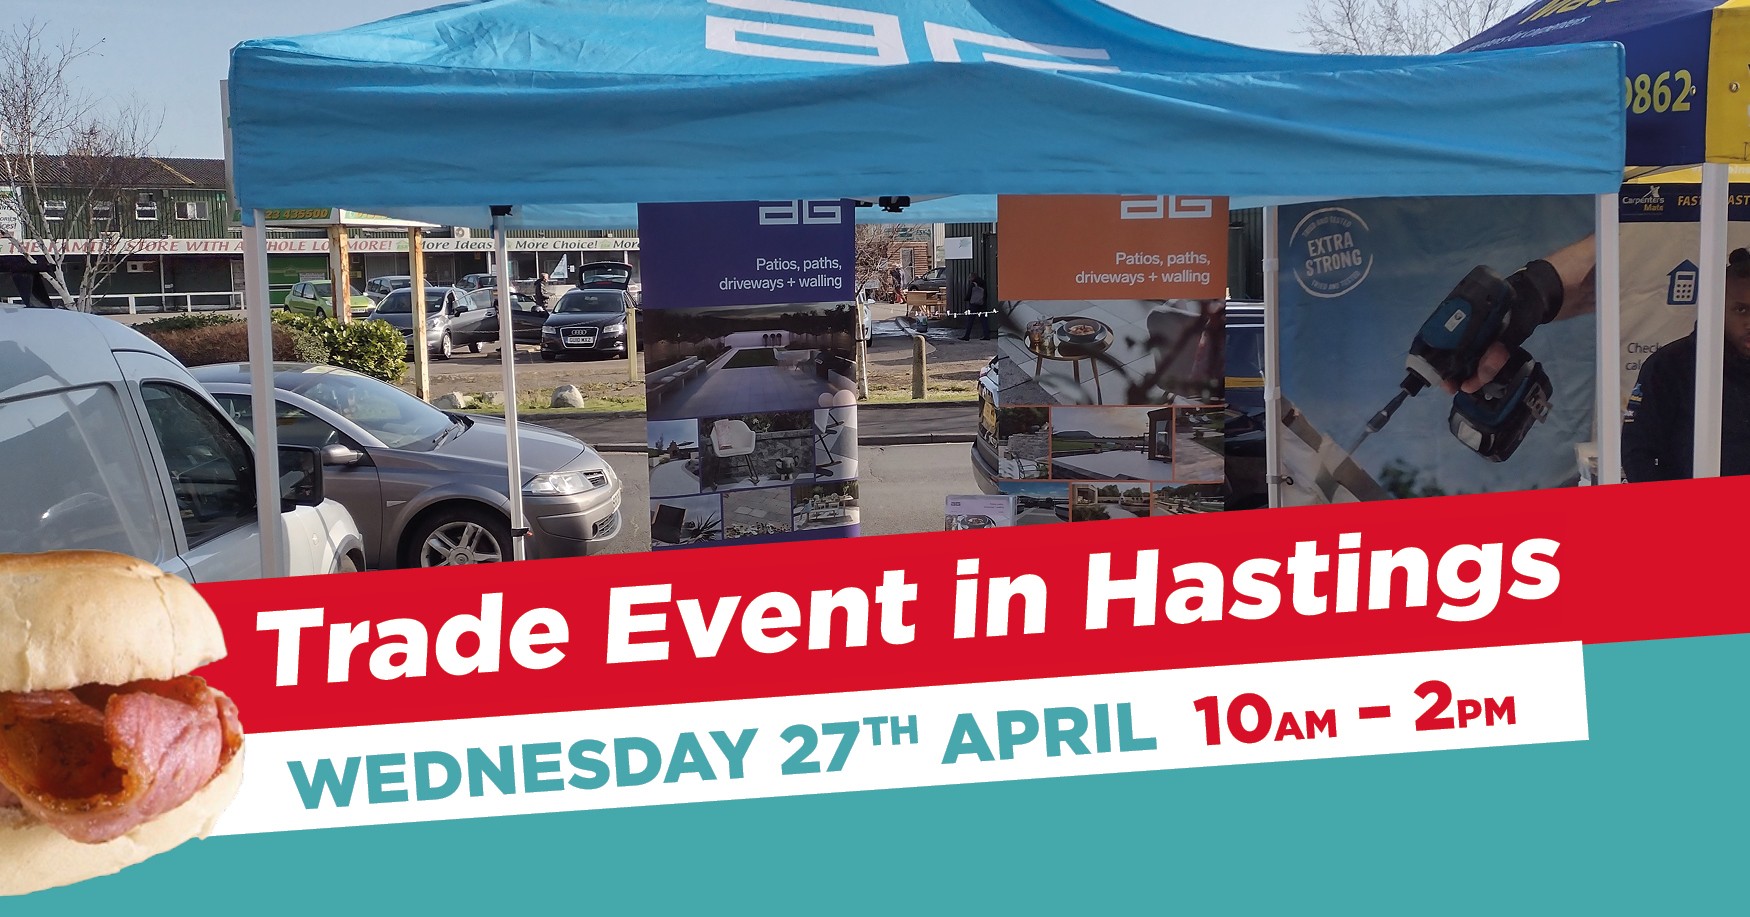 Hastings Trade Event Announced